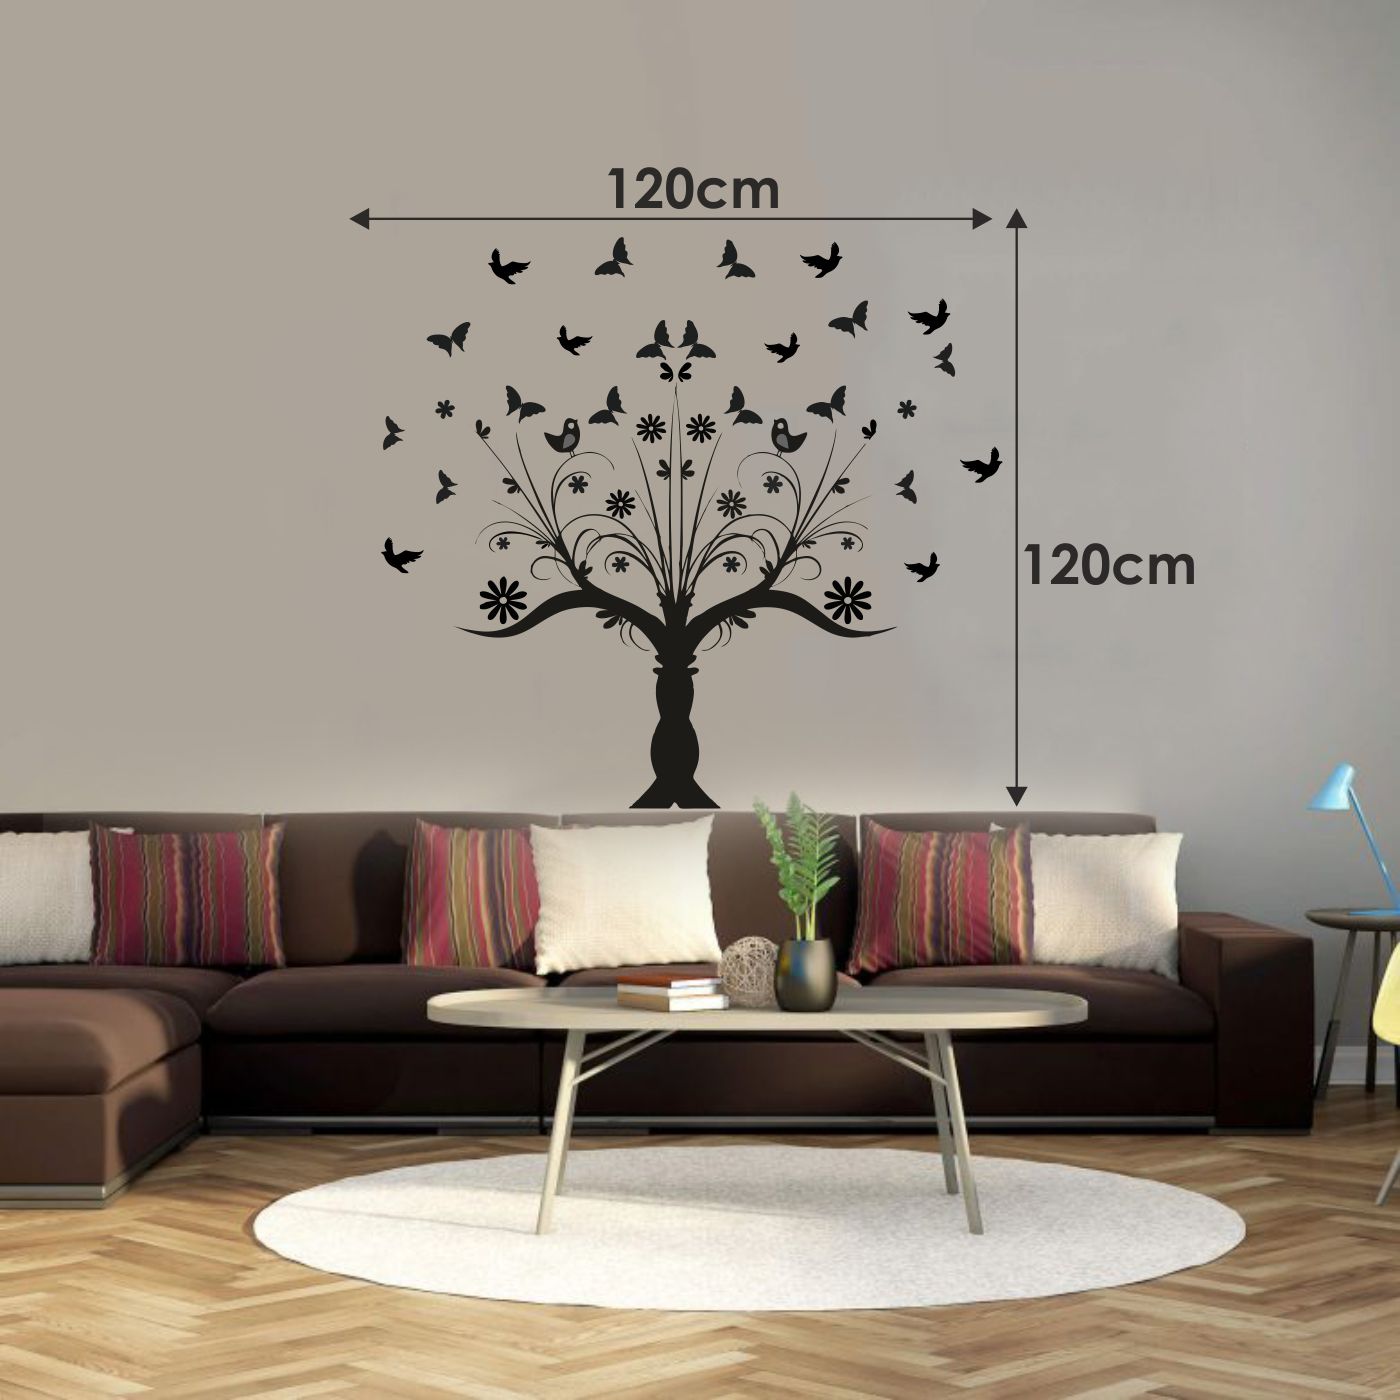 ORKA Butterfly Wall Decal Sticker 2  